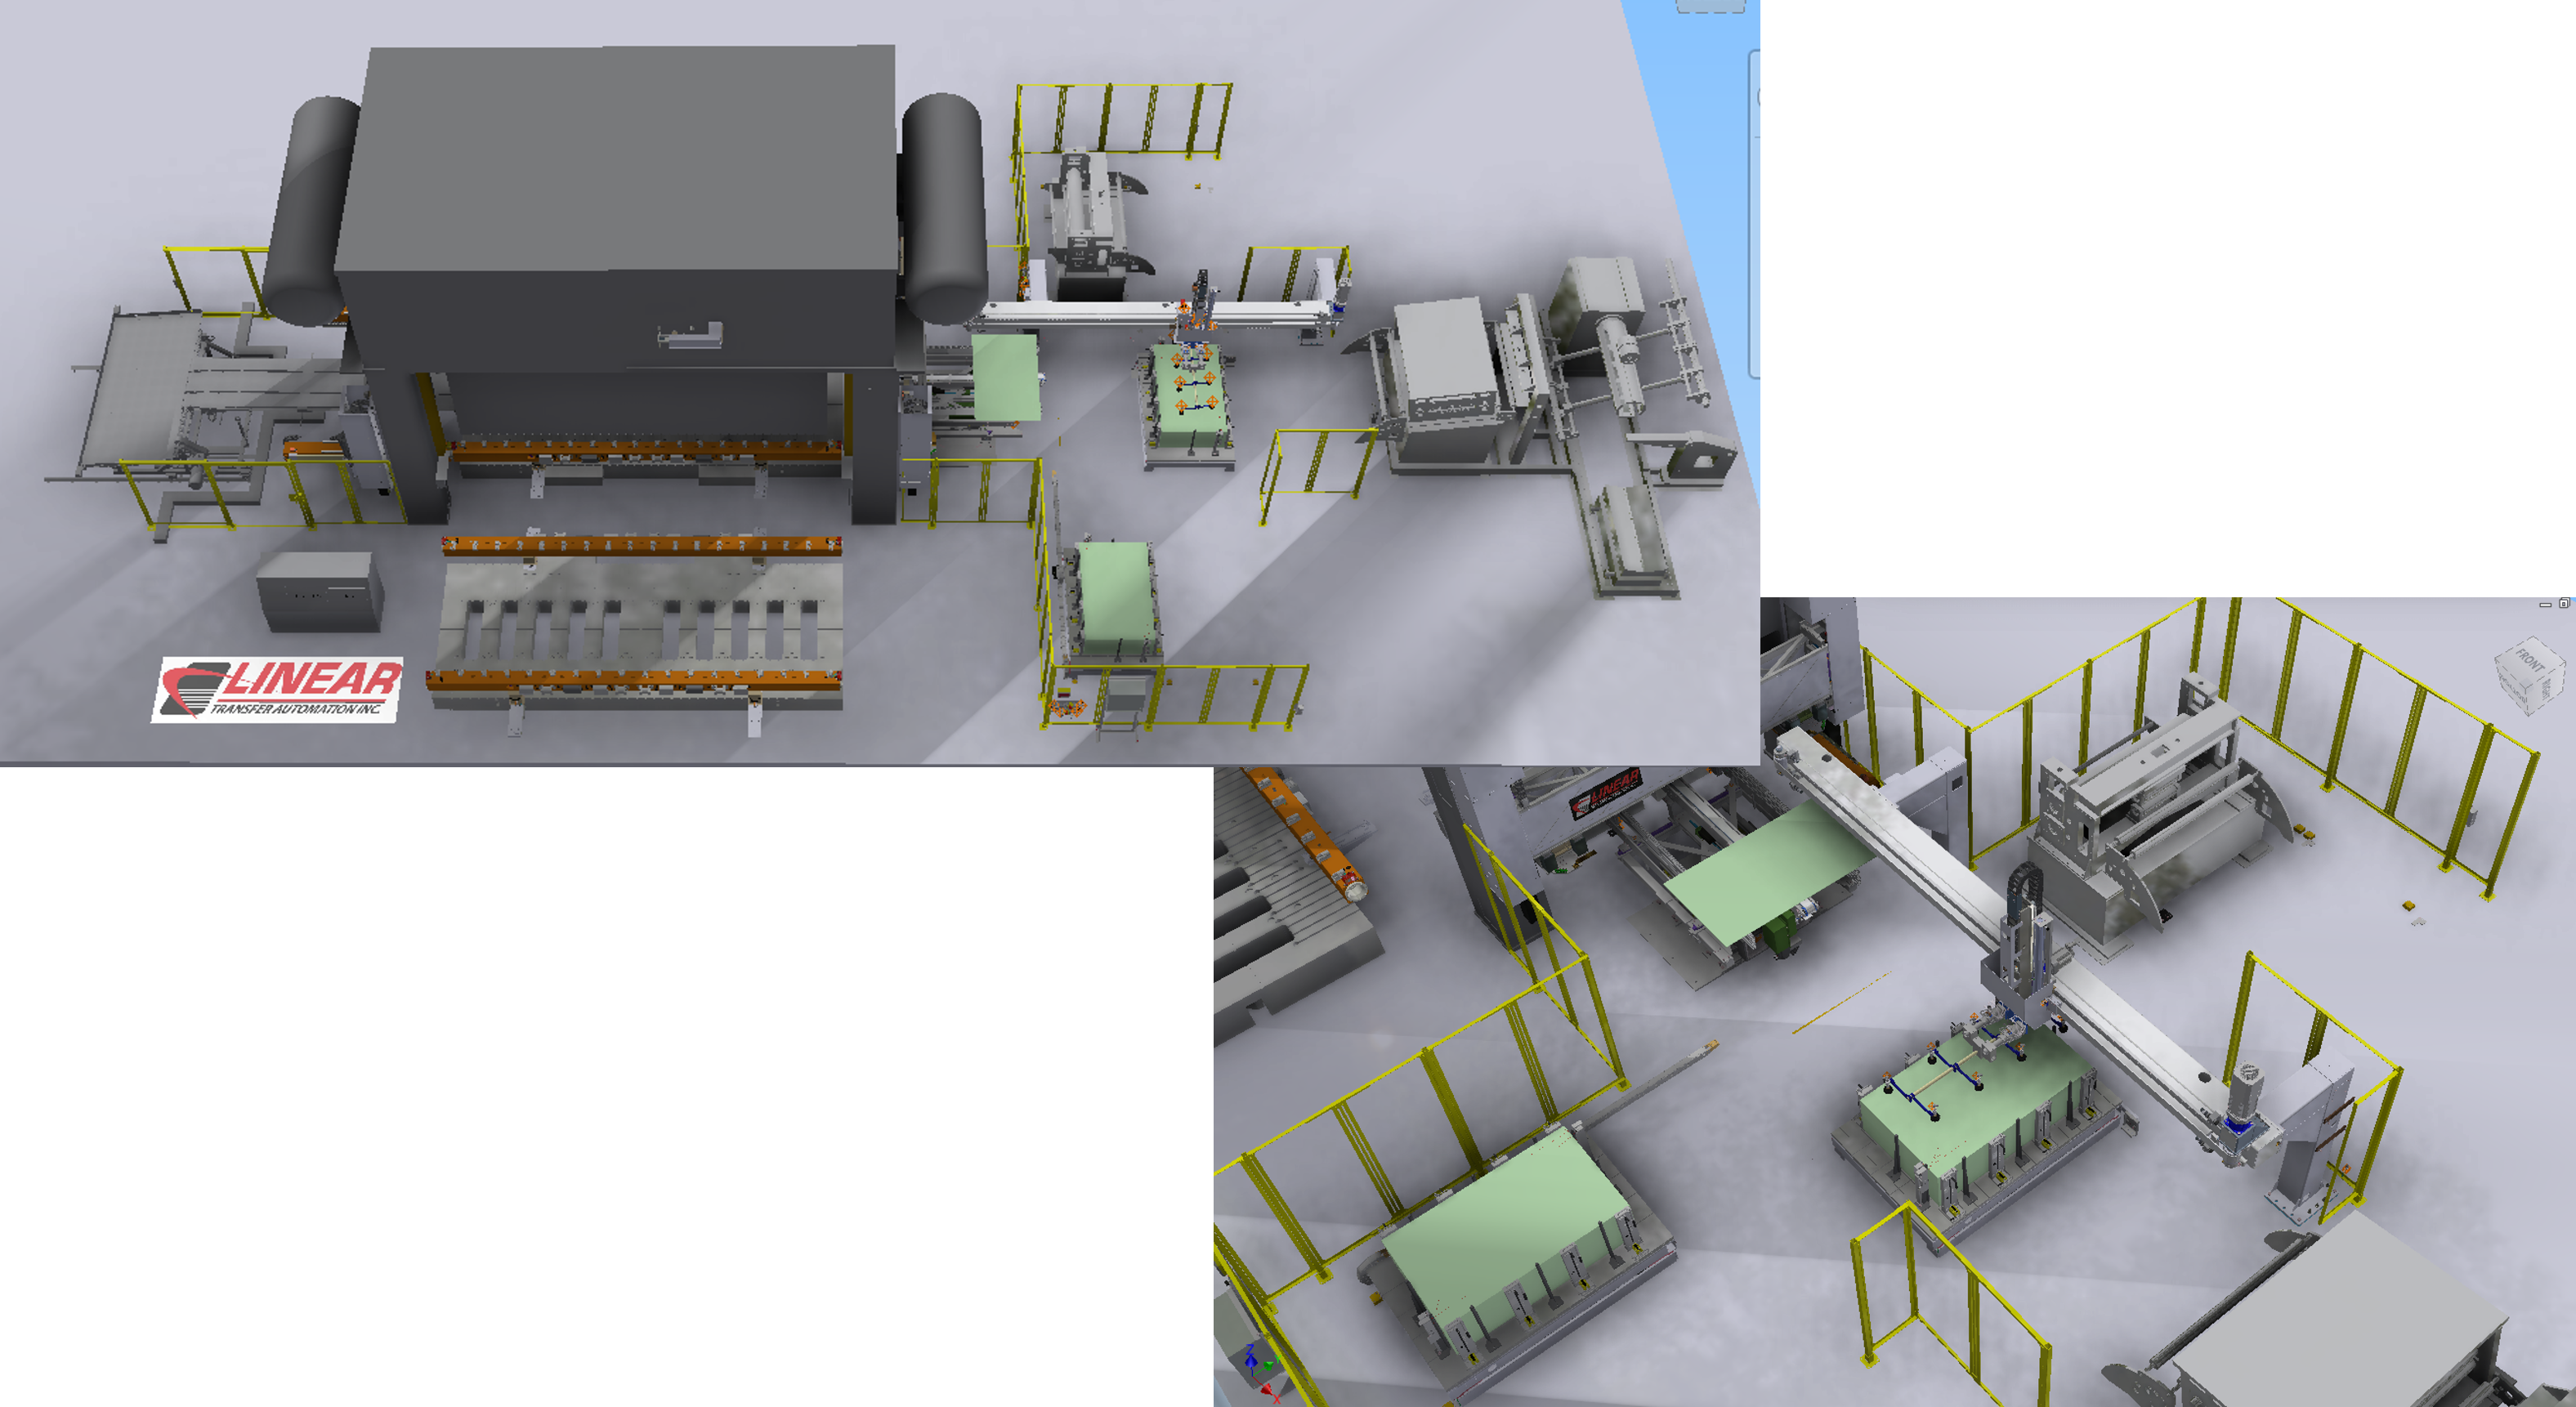 A simulated image of the front of a metal forming line highlighting Linear Automation pick-and-place blank feeder and window mounted transfer system on the press.